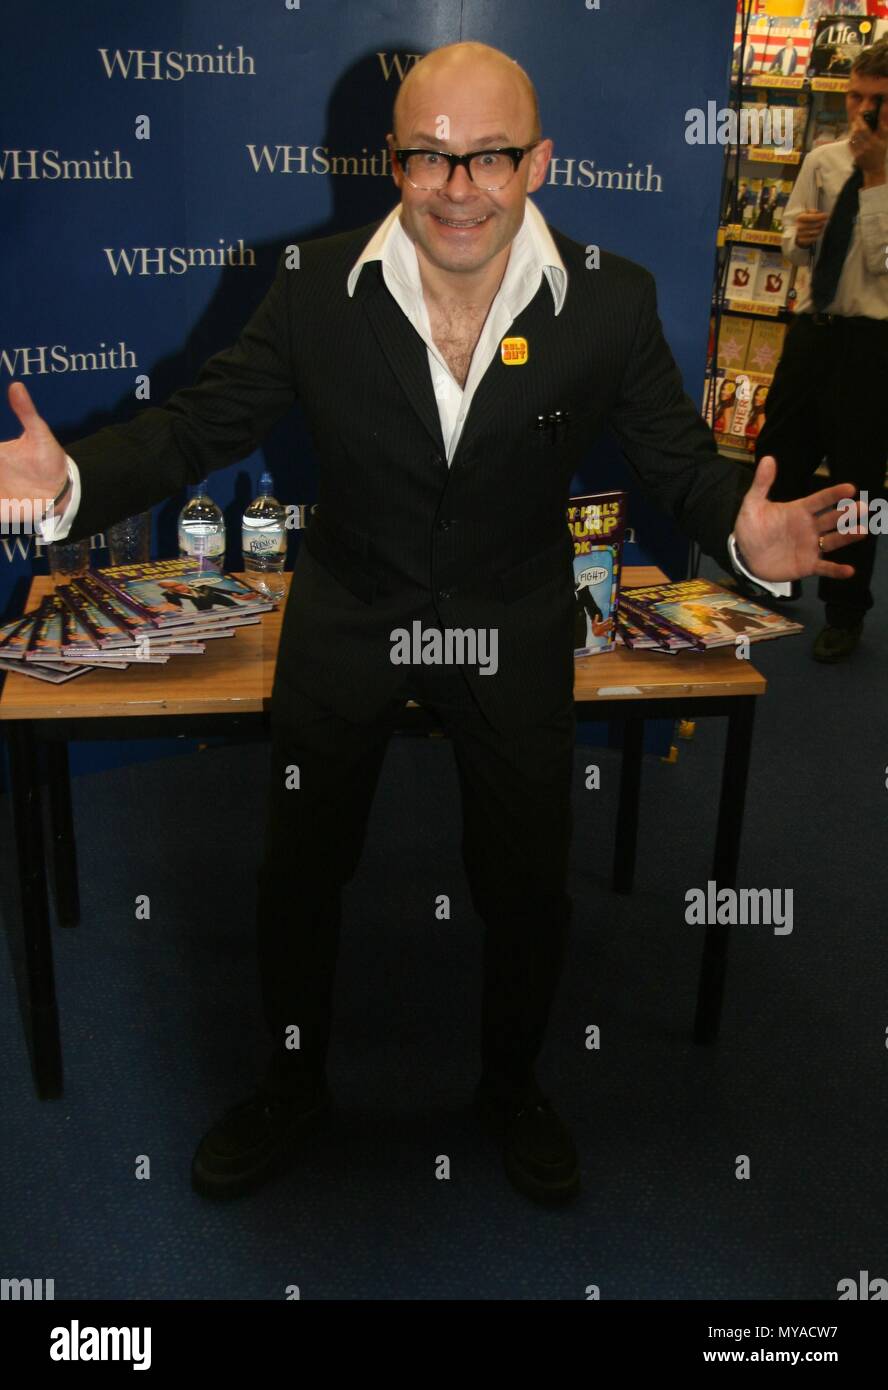 Manchester,Uk, Harry Hill signs copies of his autobiography in whsmith credit Ian Fairbrother/Alamy Stock Photos Stock Photo